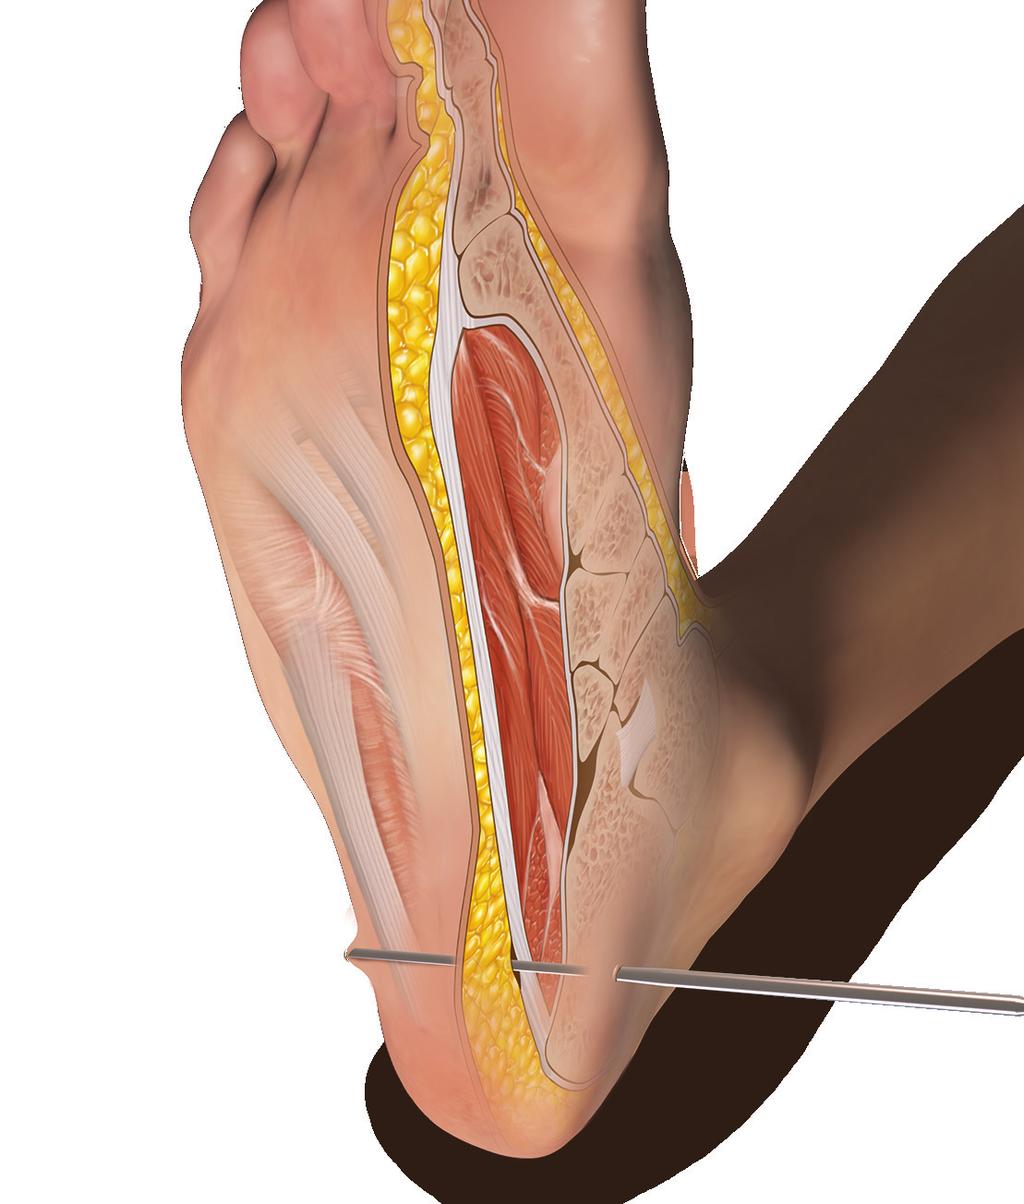 inferior to the plantar fascia. 2 A blunt instrument such as a hemostat, is inserted to correctly identify the proper plane.